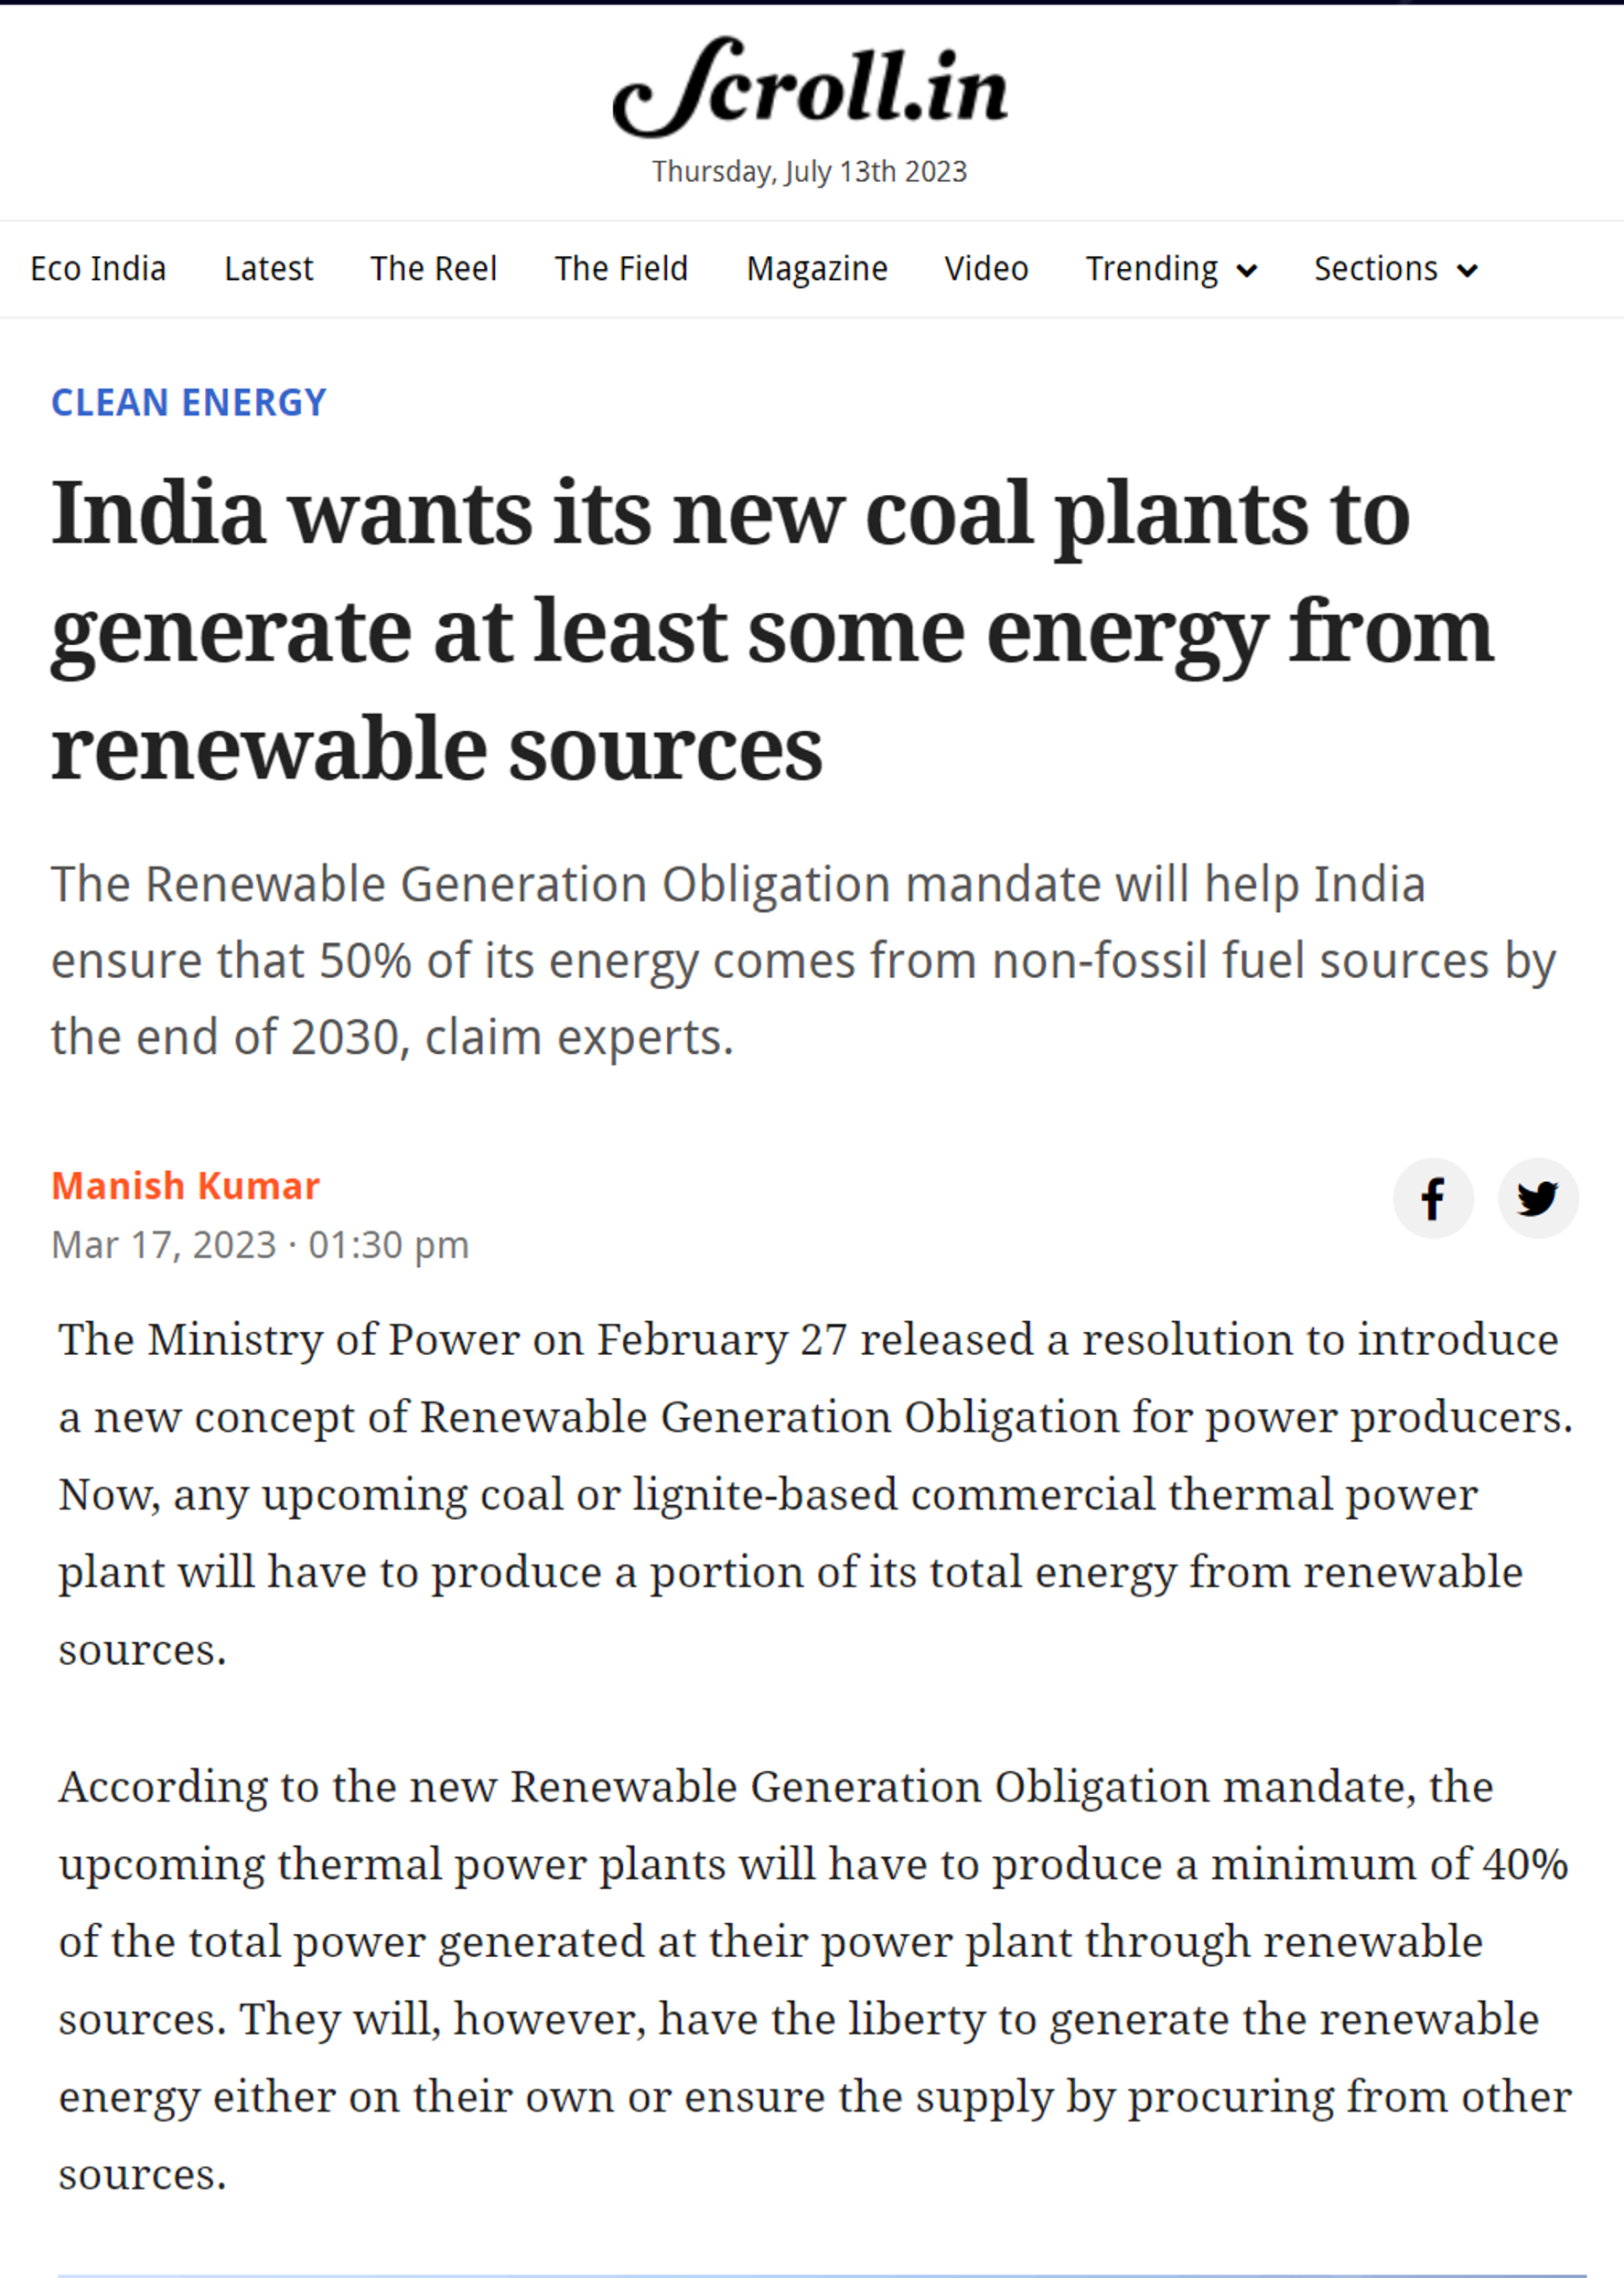 Rishu Garg quoted by Scroll on the integration of renewables by new coal plants